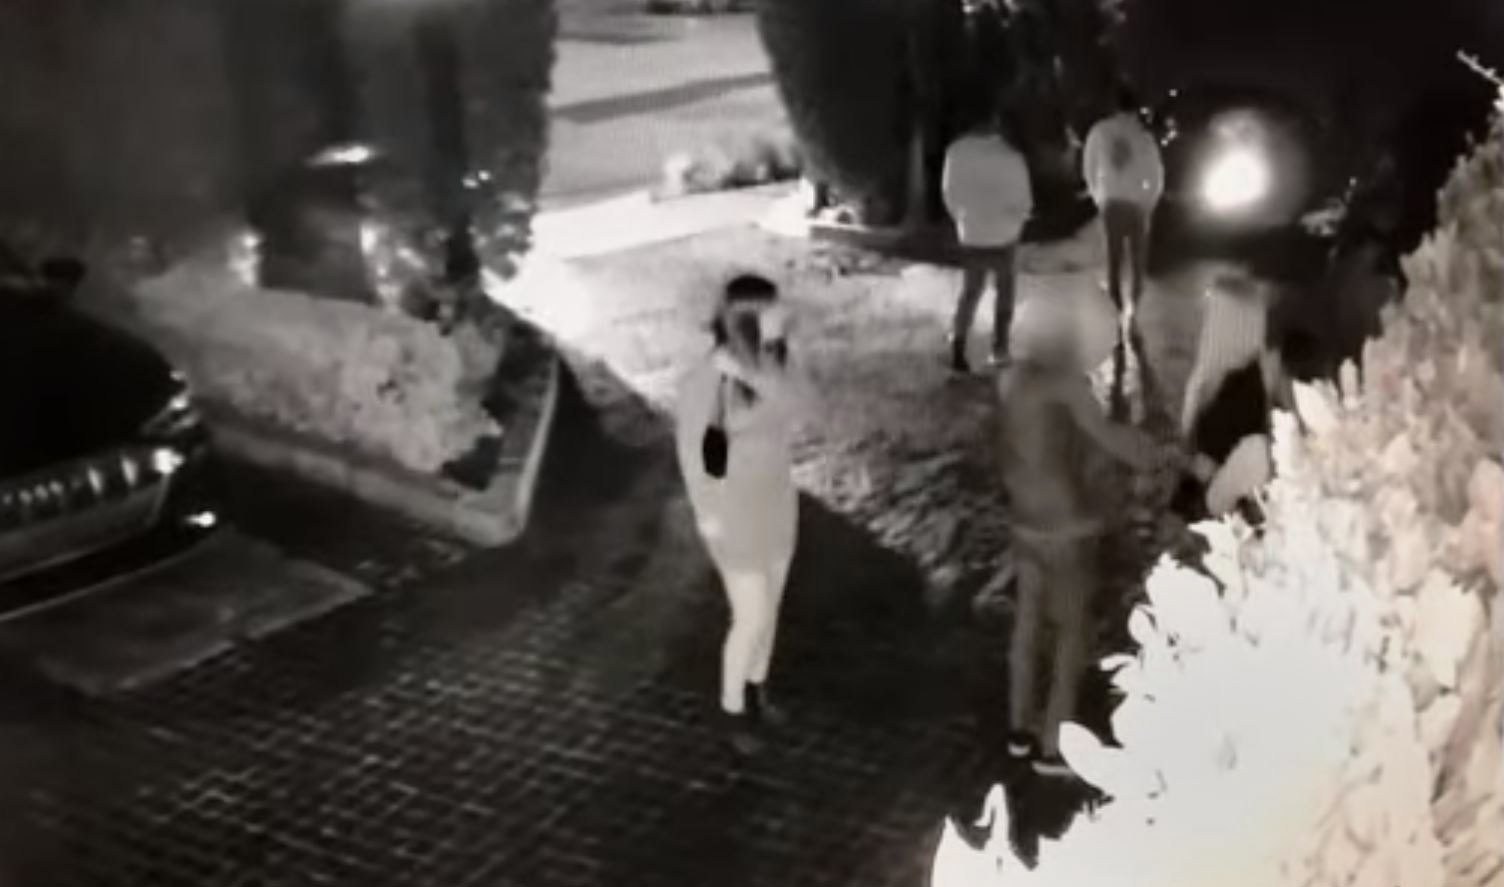 PHOTO: The LAPD is looking for two women wanted for grand theft. The LAPD released surveillance video from the October 28, 2019, incident.